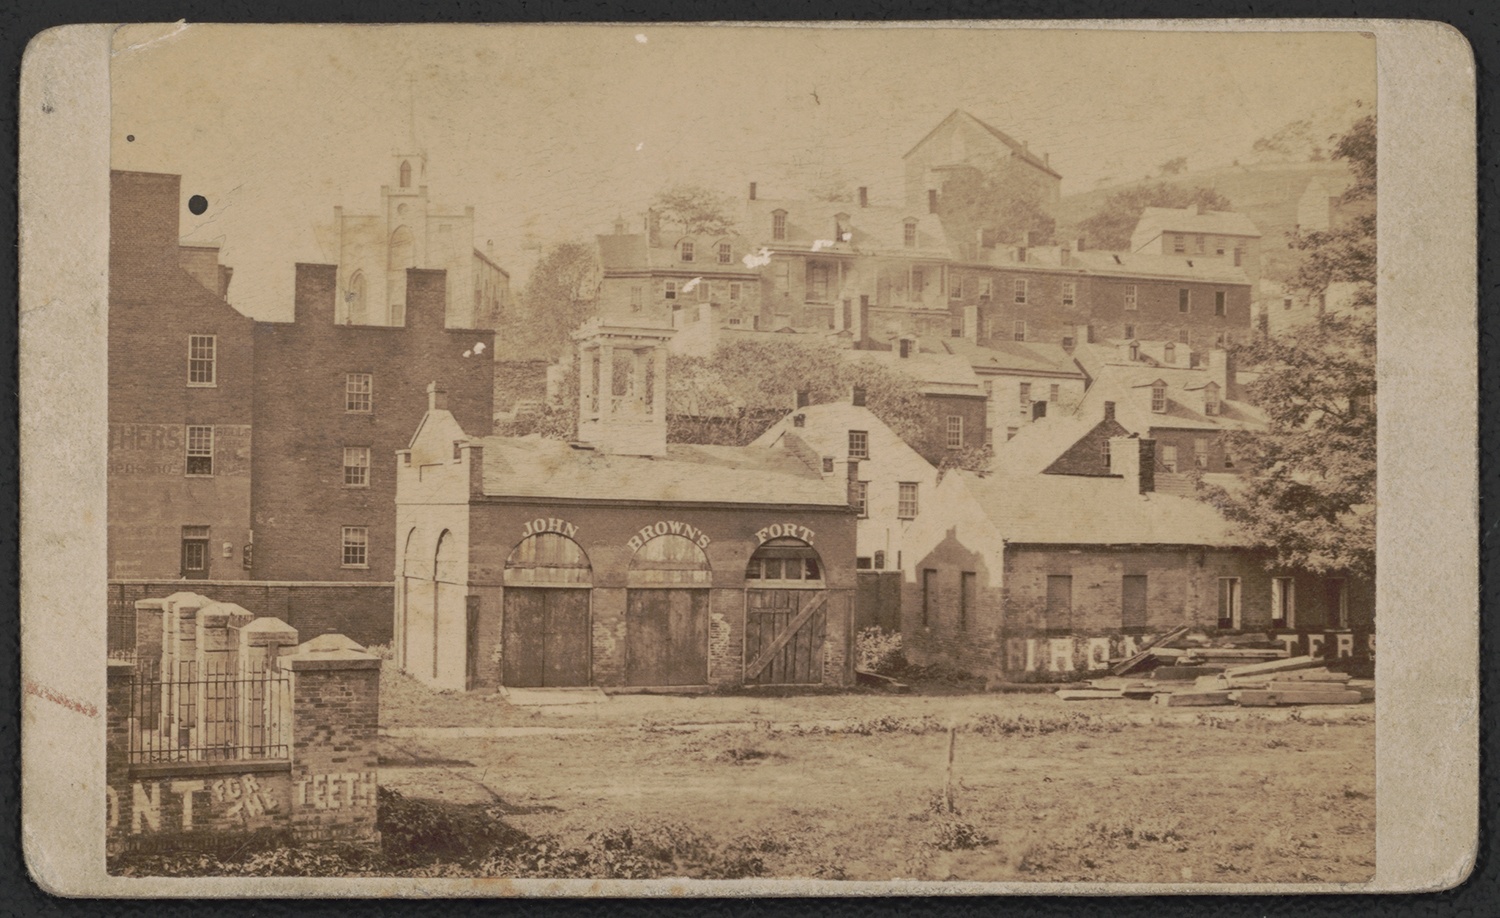 Photograph showing the fire engine house used by John Brown during his raid on Harper’s Ferry, c. 1885. The words “John Brown’s Fort” were painted on the building to attract tourists. Courtesy of the Library of Congress, Prints and Photographs Division.